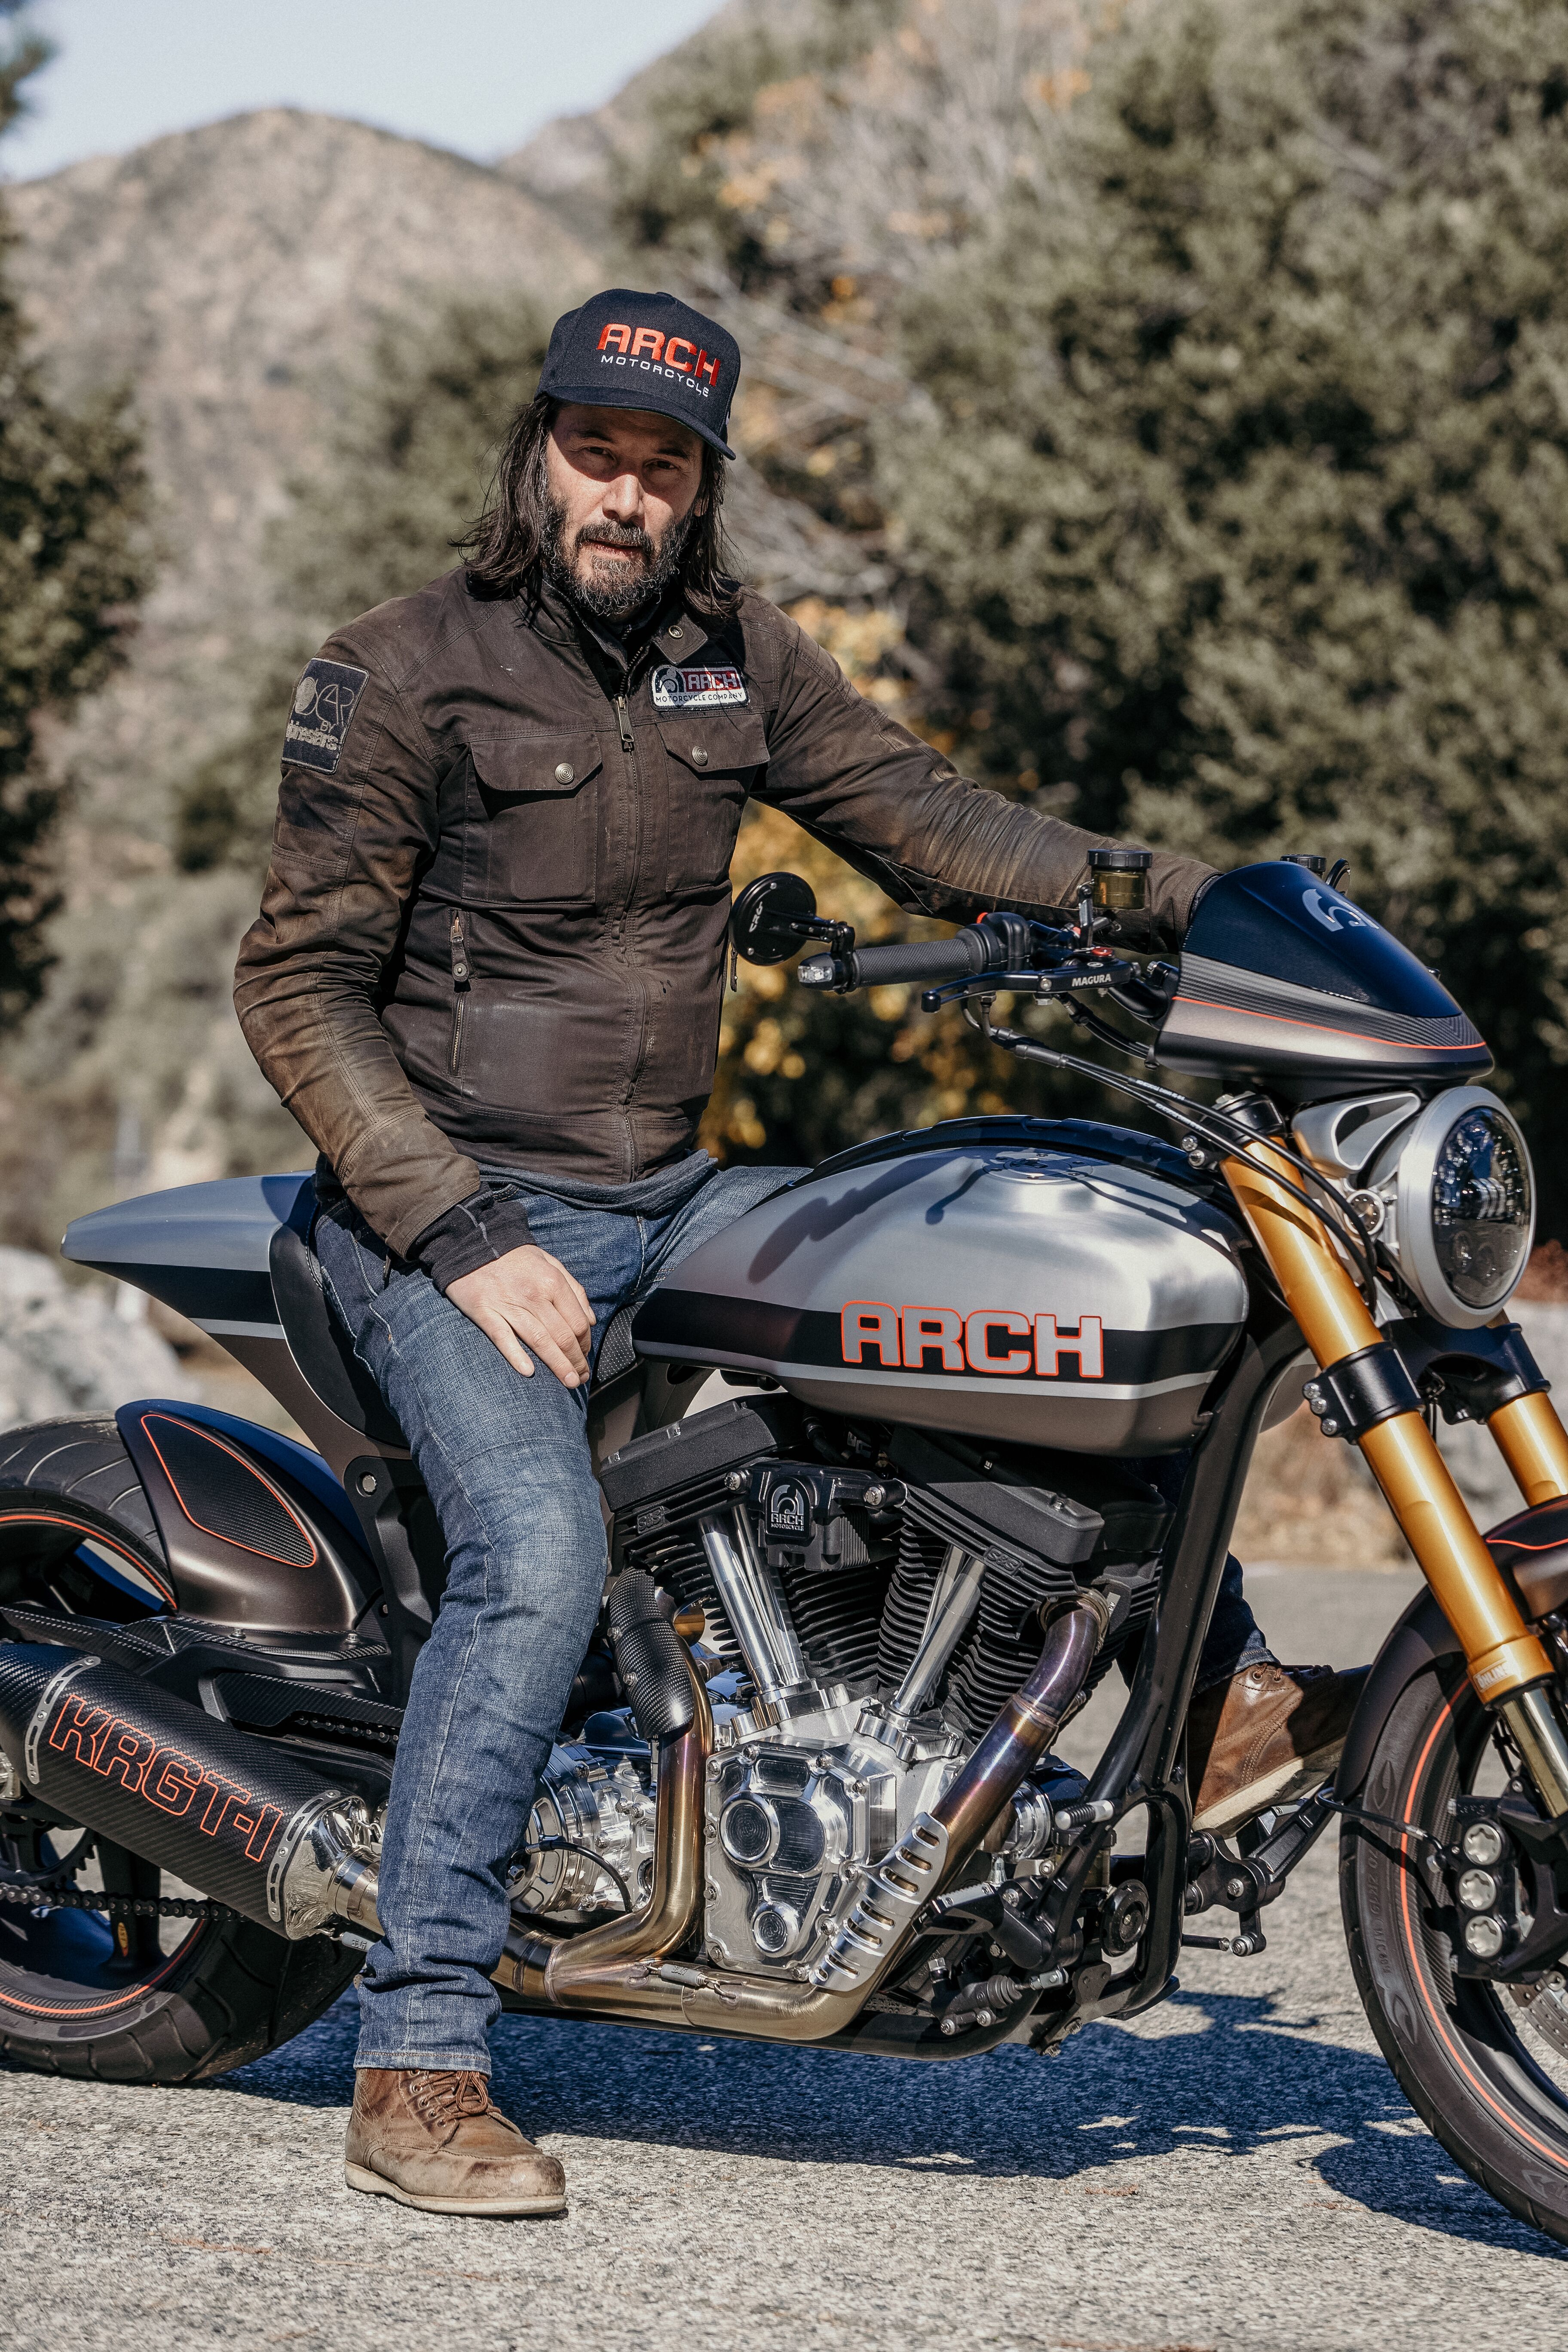 arch motorcycle price 2019